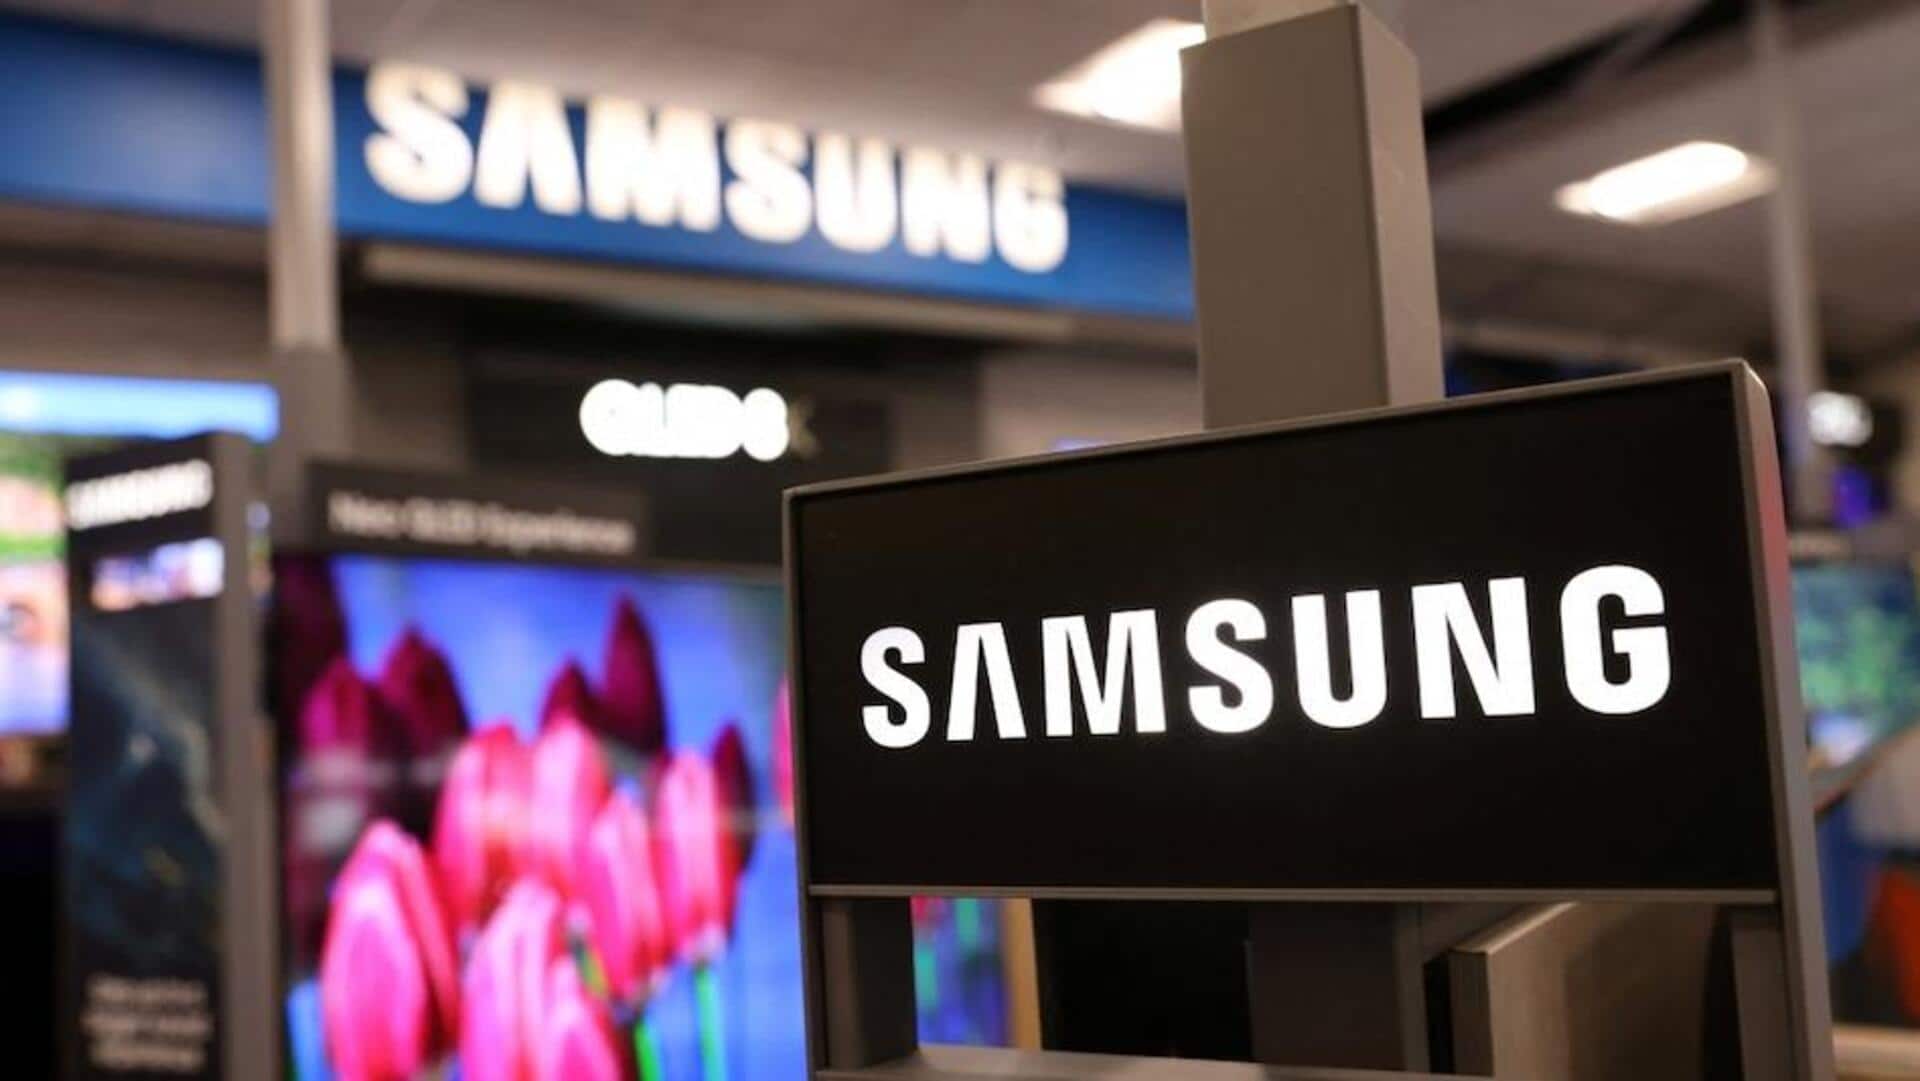 Samsung amplifies chip-manufacturing in Texas with $44 billion investment commitment